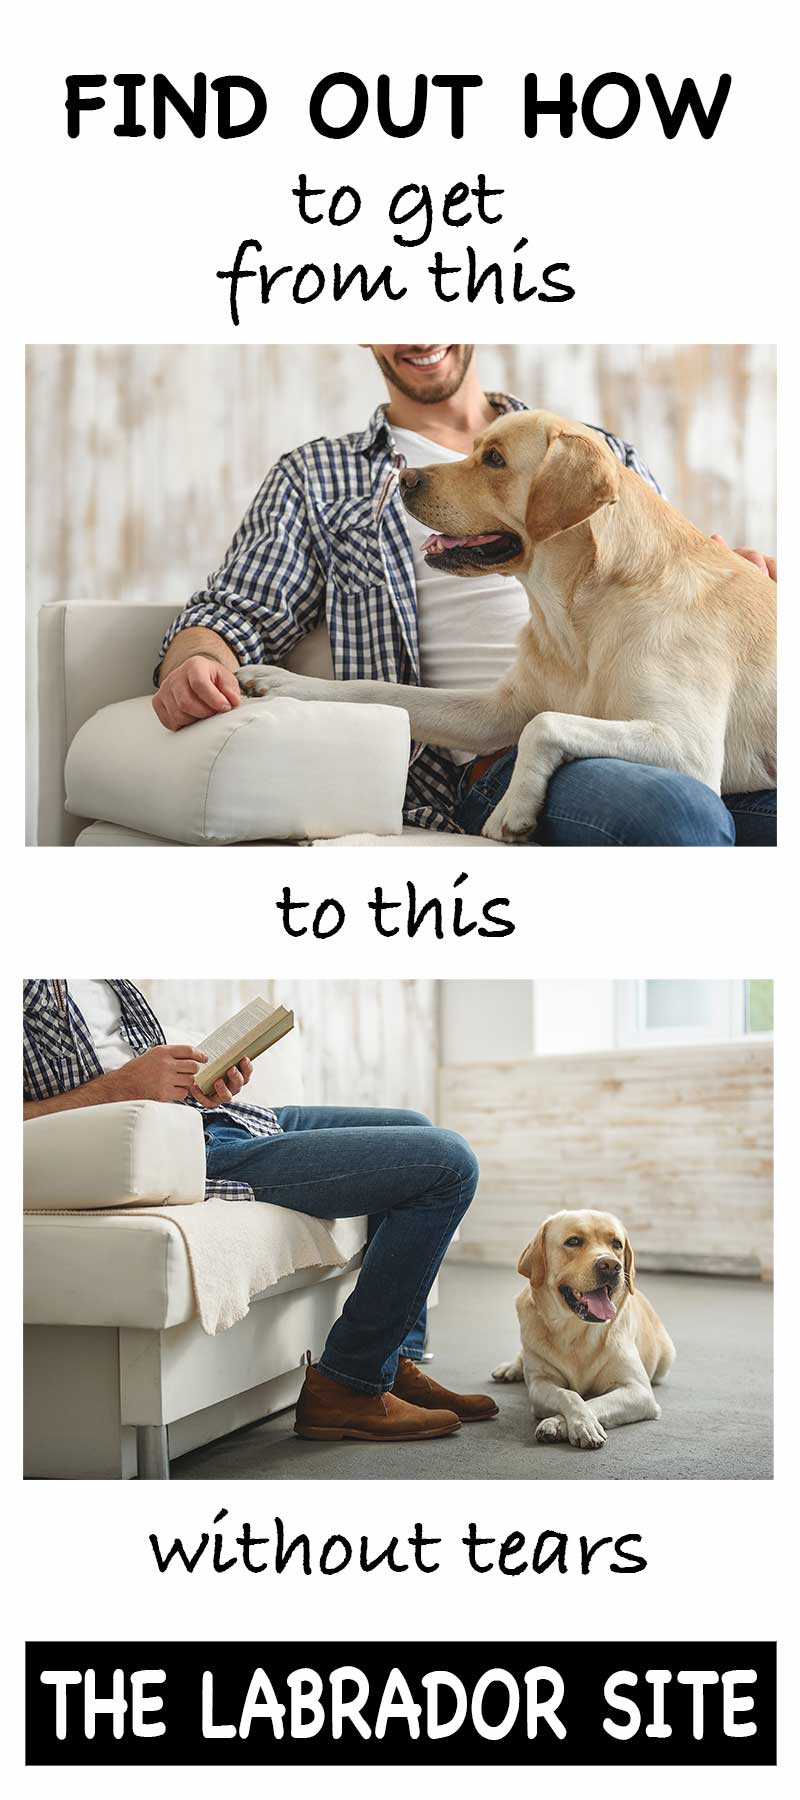 Attention seeking dog? Teach your dog to settle while you read or watch TV